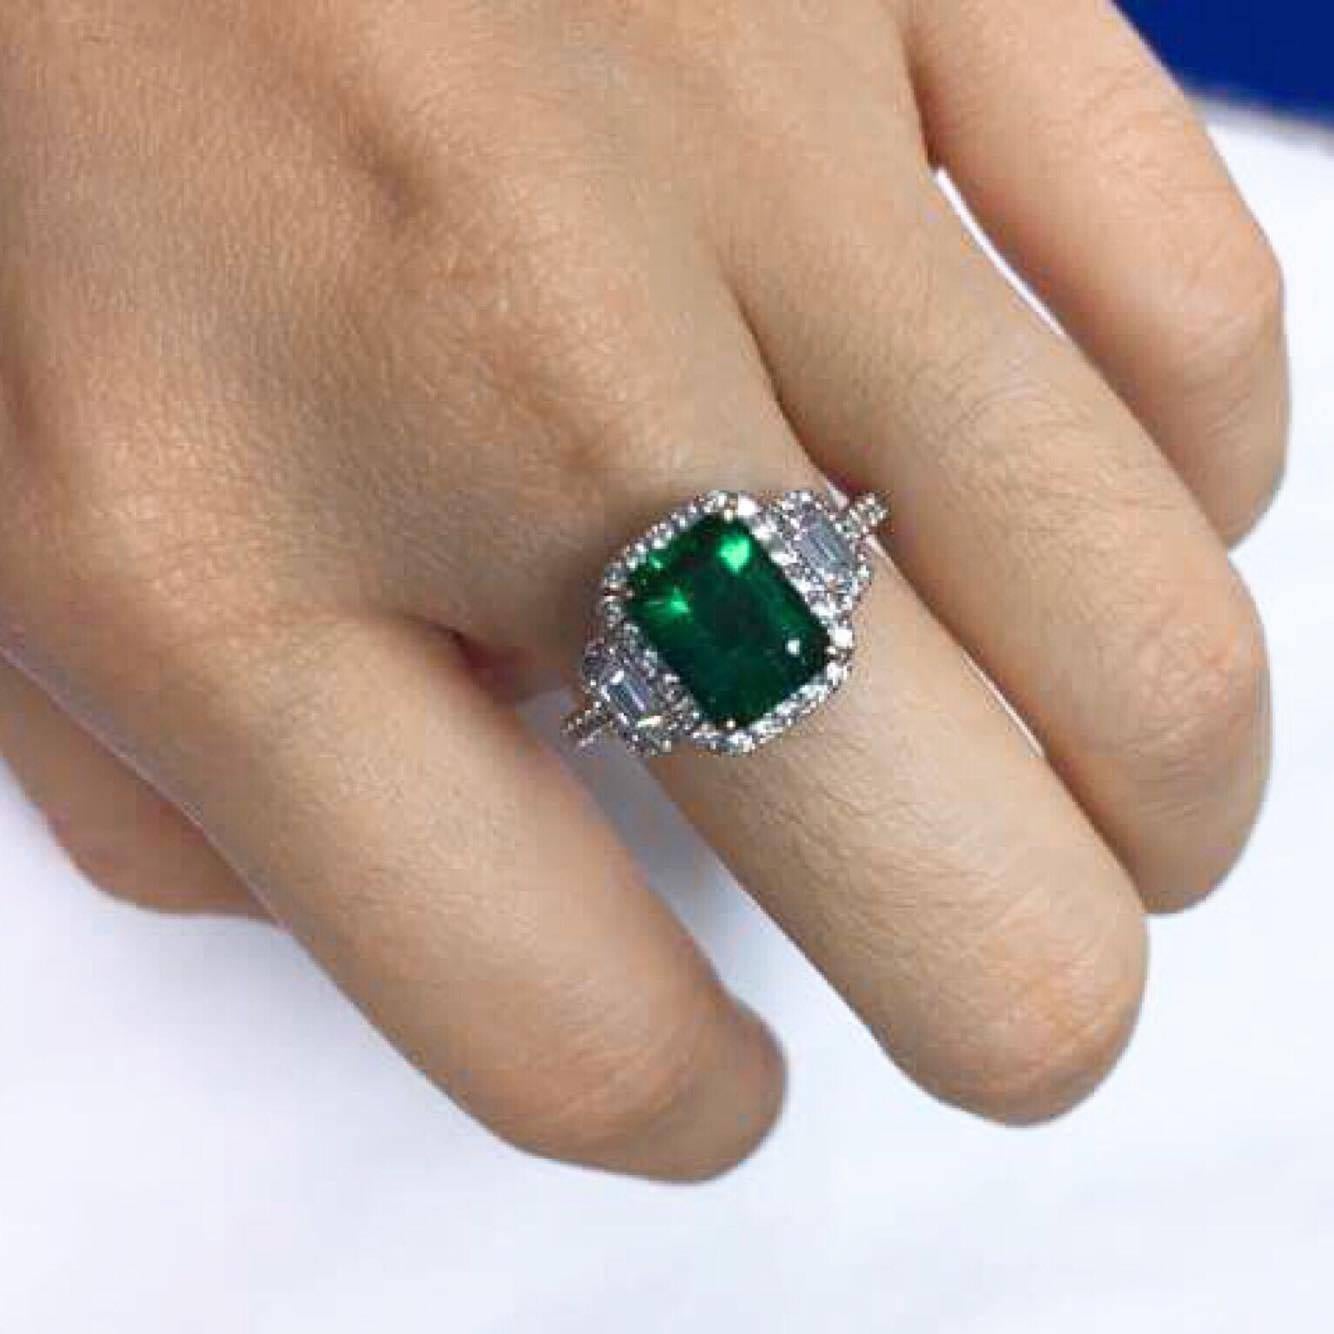 Certified Intense Green Emerald Diamond ring. The
Emerald:2.10ct
Side Diamonds E VVS1 Clarity=0.81ct

You will rarely find an emerald of this caliber, if you want the rarest you have found it! 